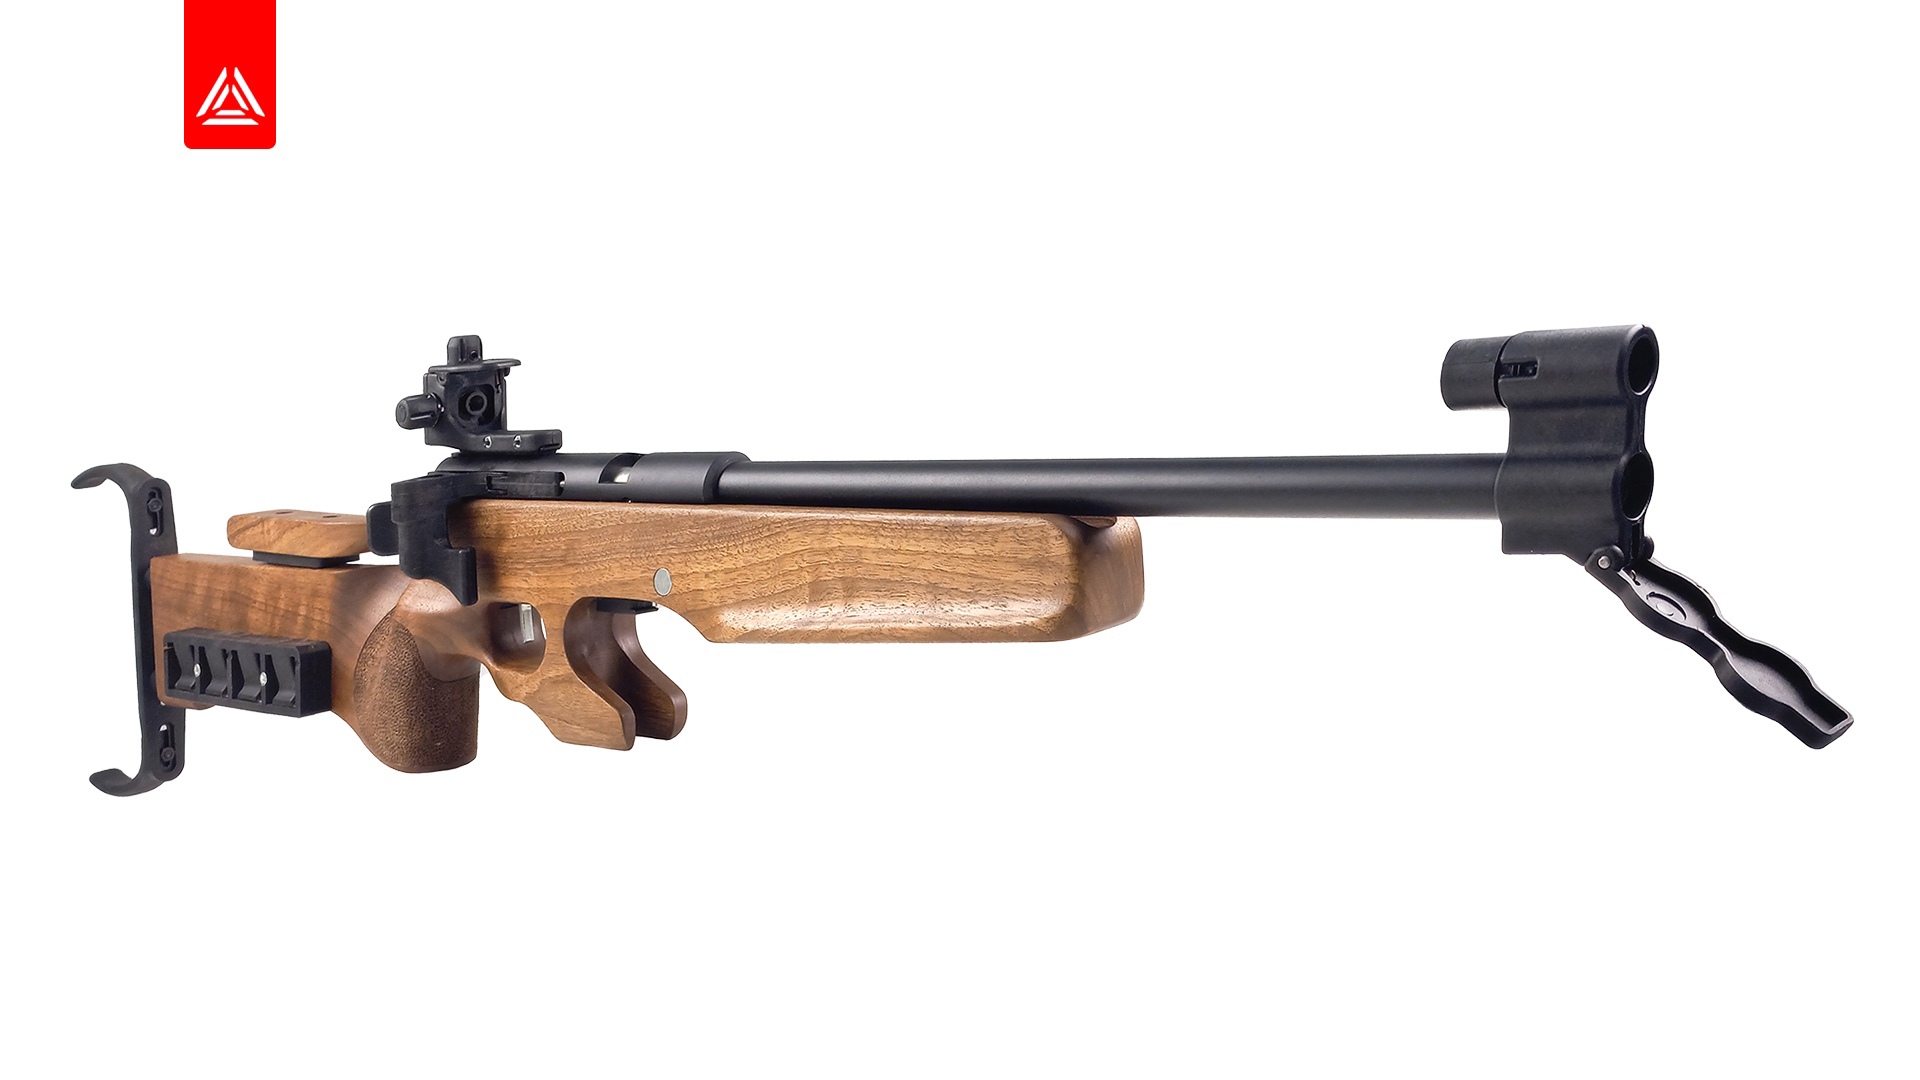 Summer promotion! Biathlon rifles with a 10% discount